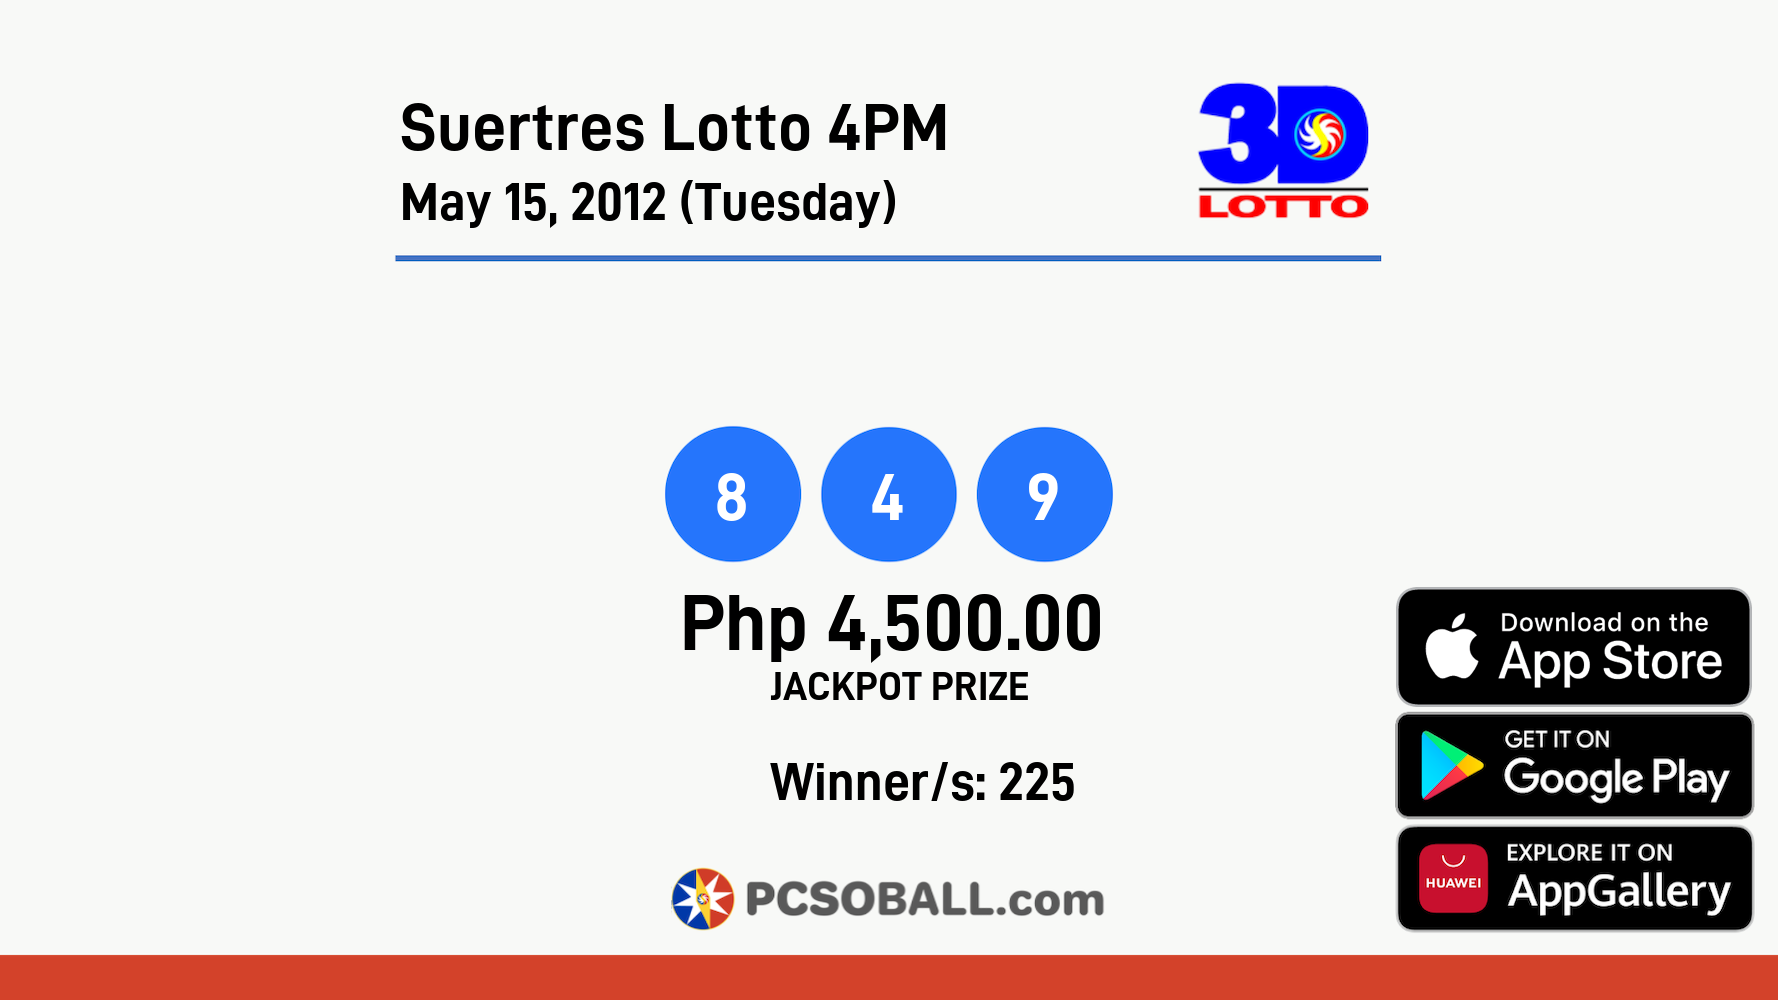 Suertres Lotto 4PM May 15, 2012 (Tuesday) Result